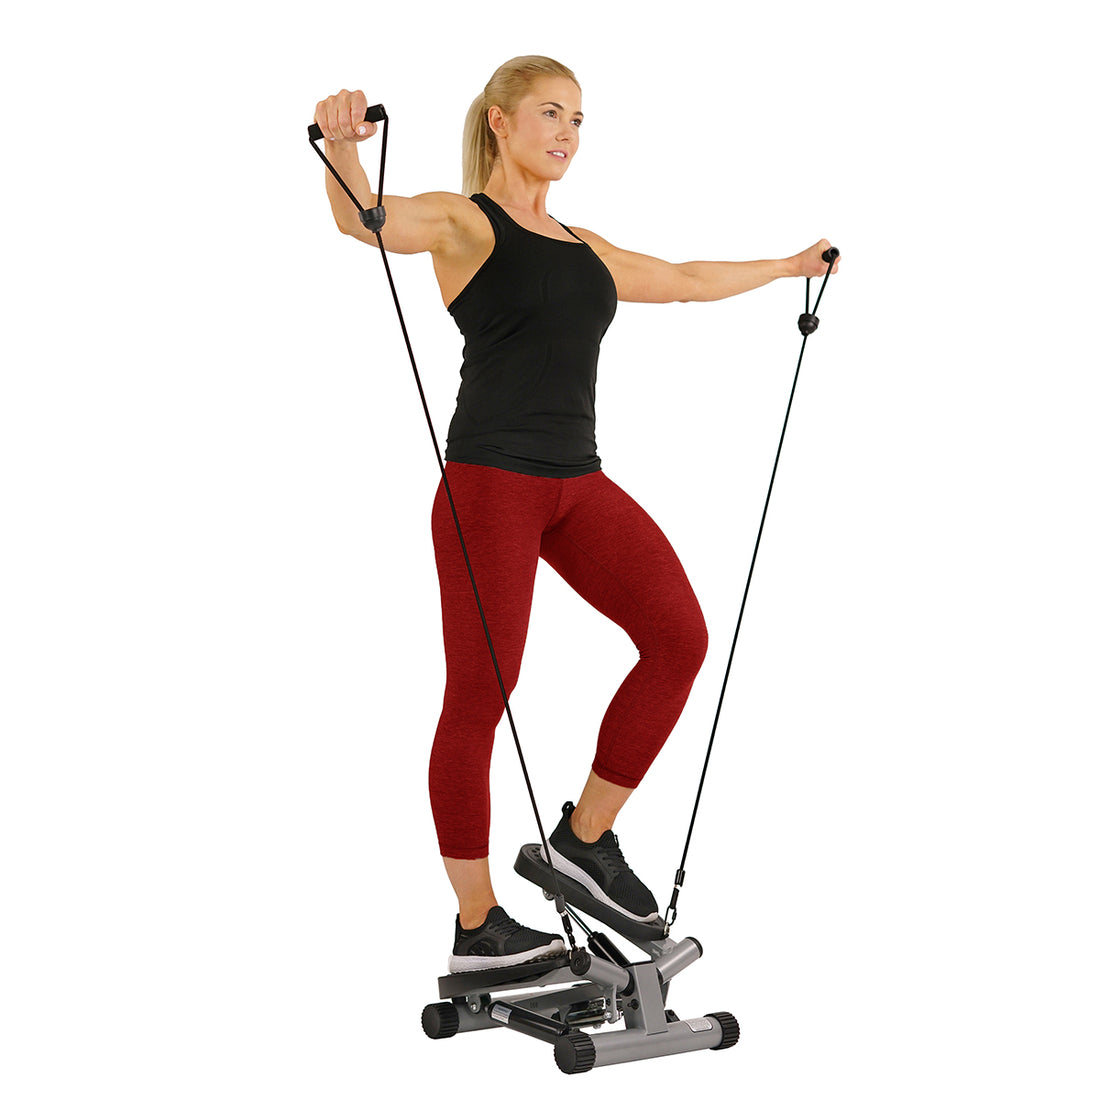 Twisting Stair Stepper Step Machine w/ Resistance Bands and LCD Monito